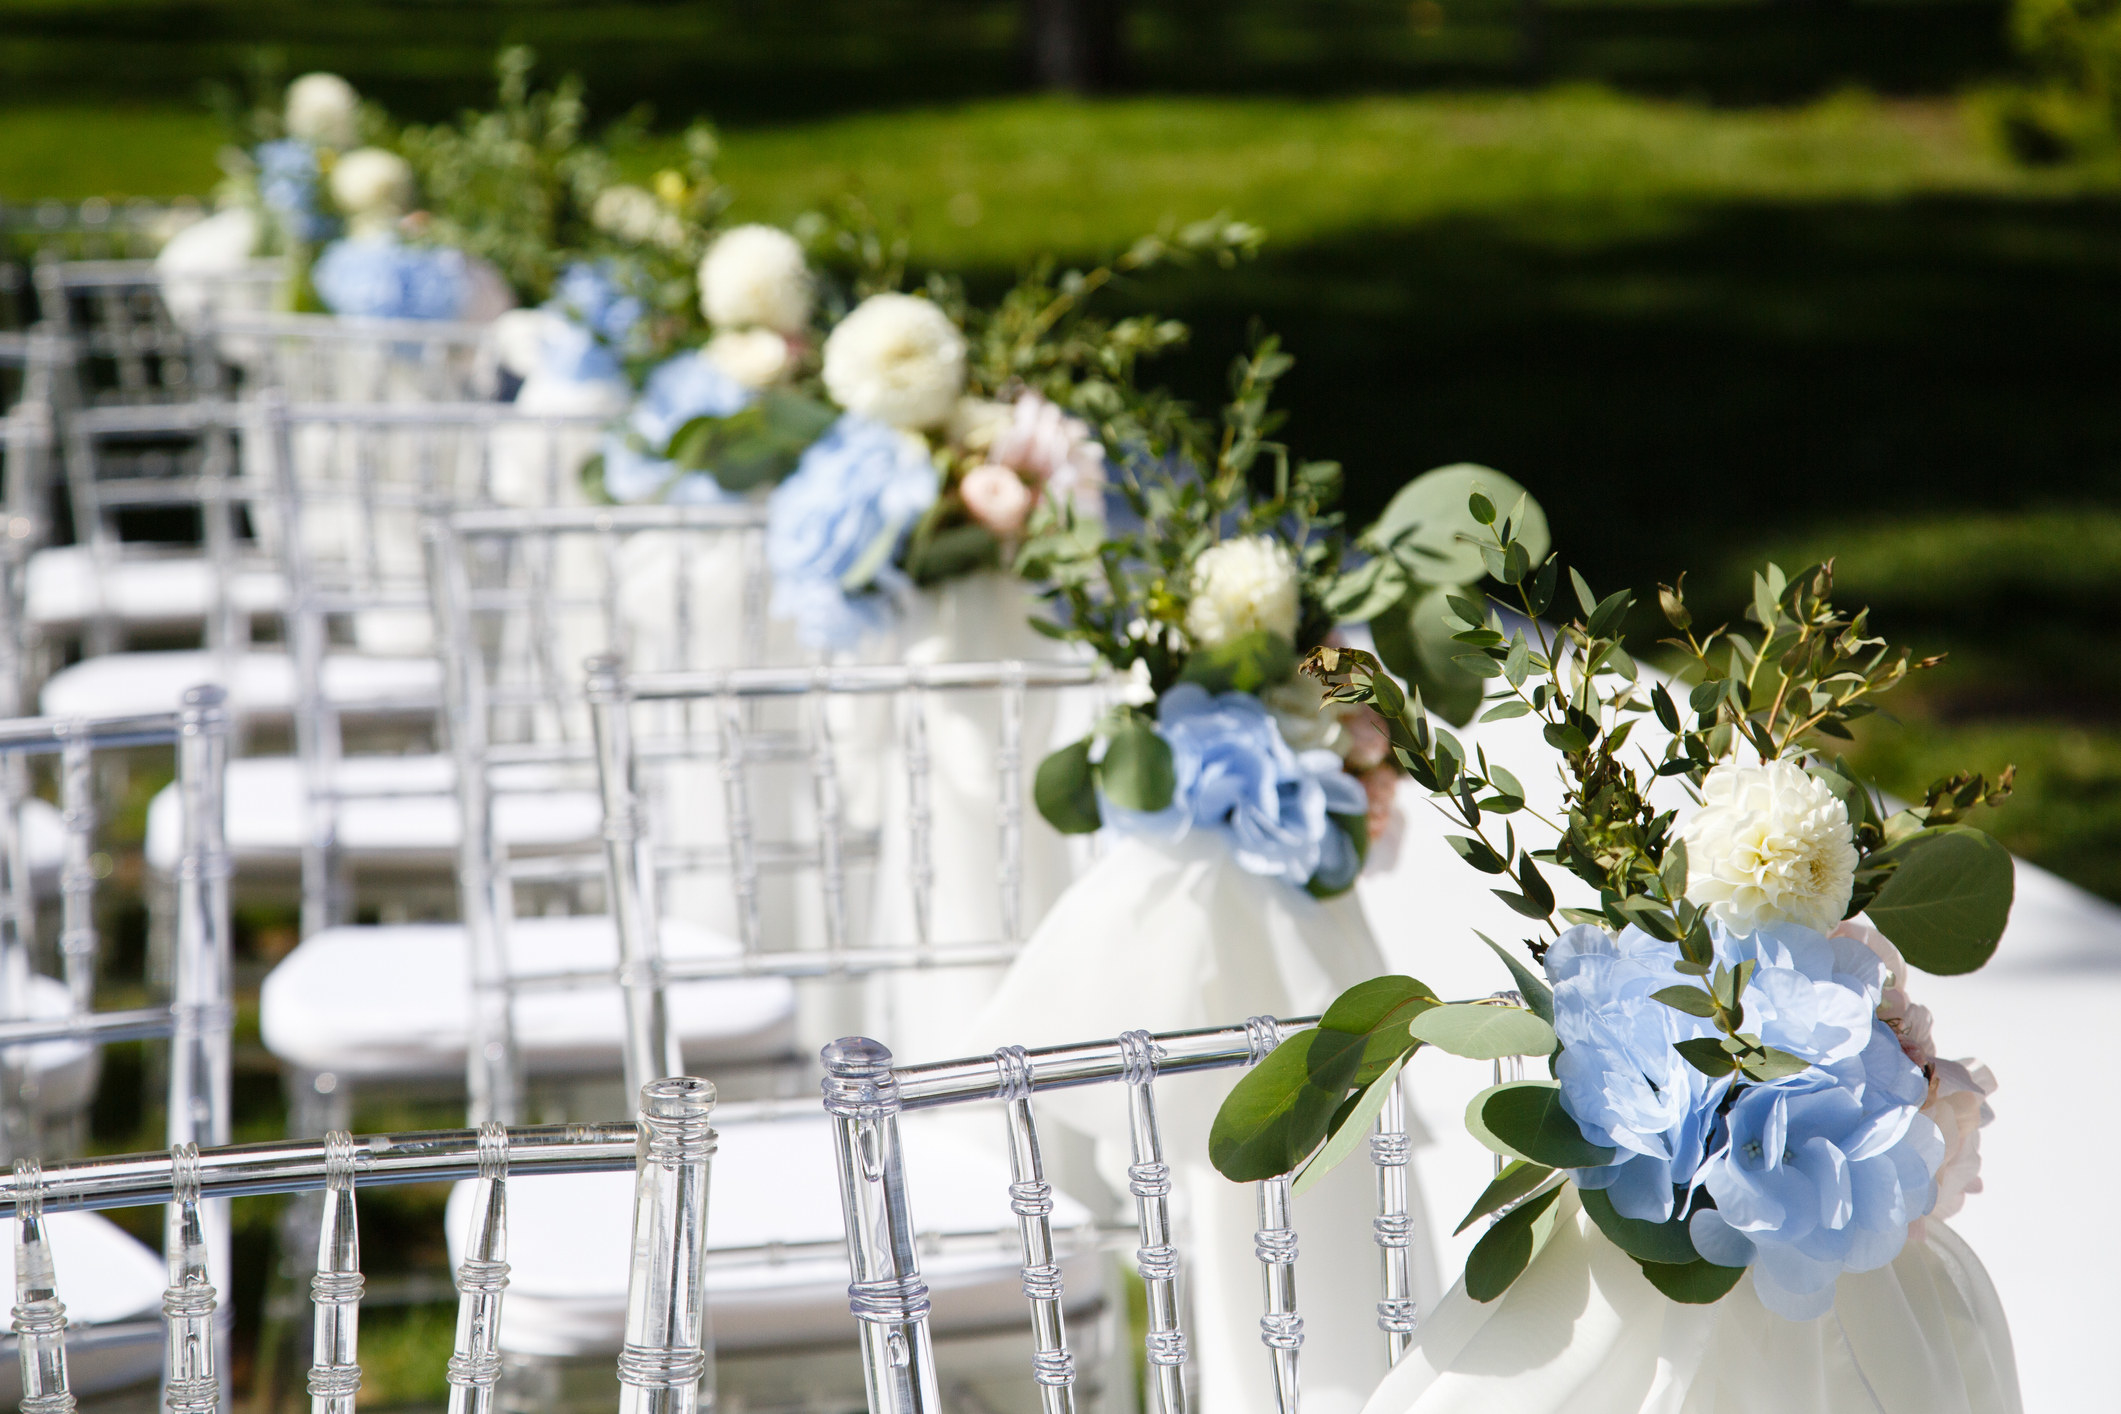 chairs lined up and tied with flowers for a ceremony